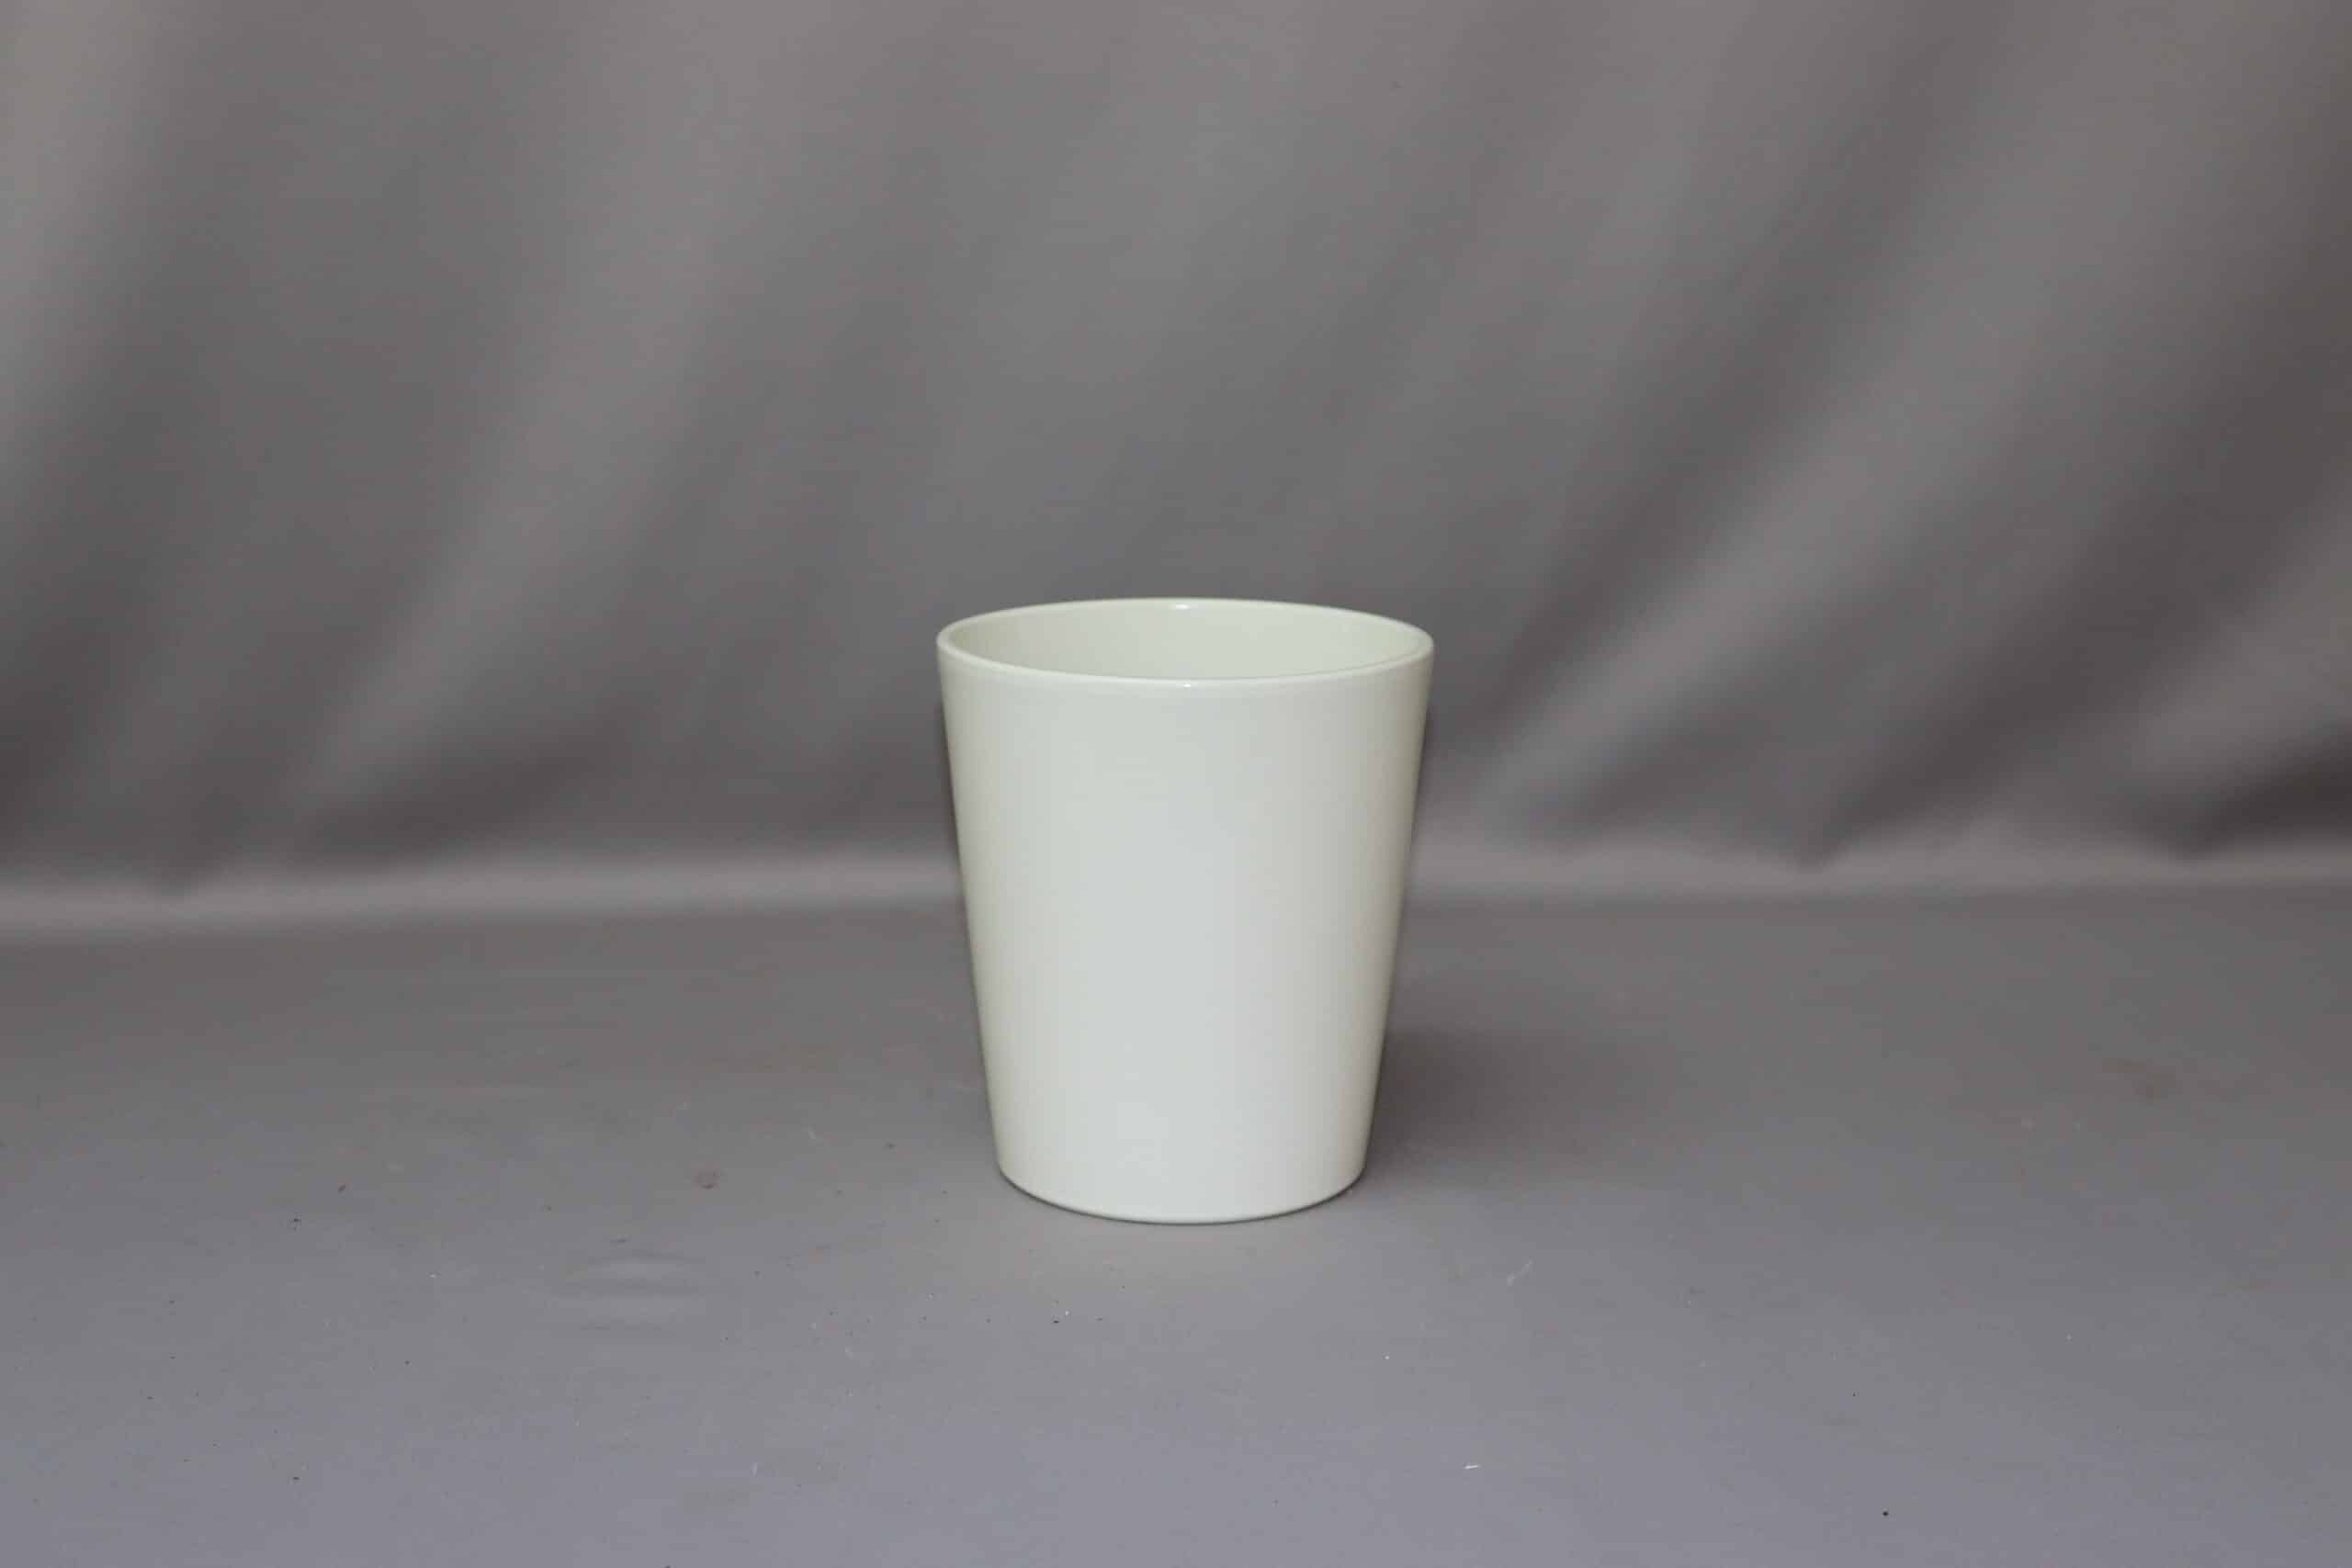 Smooth white pot cover for potted plants.